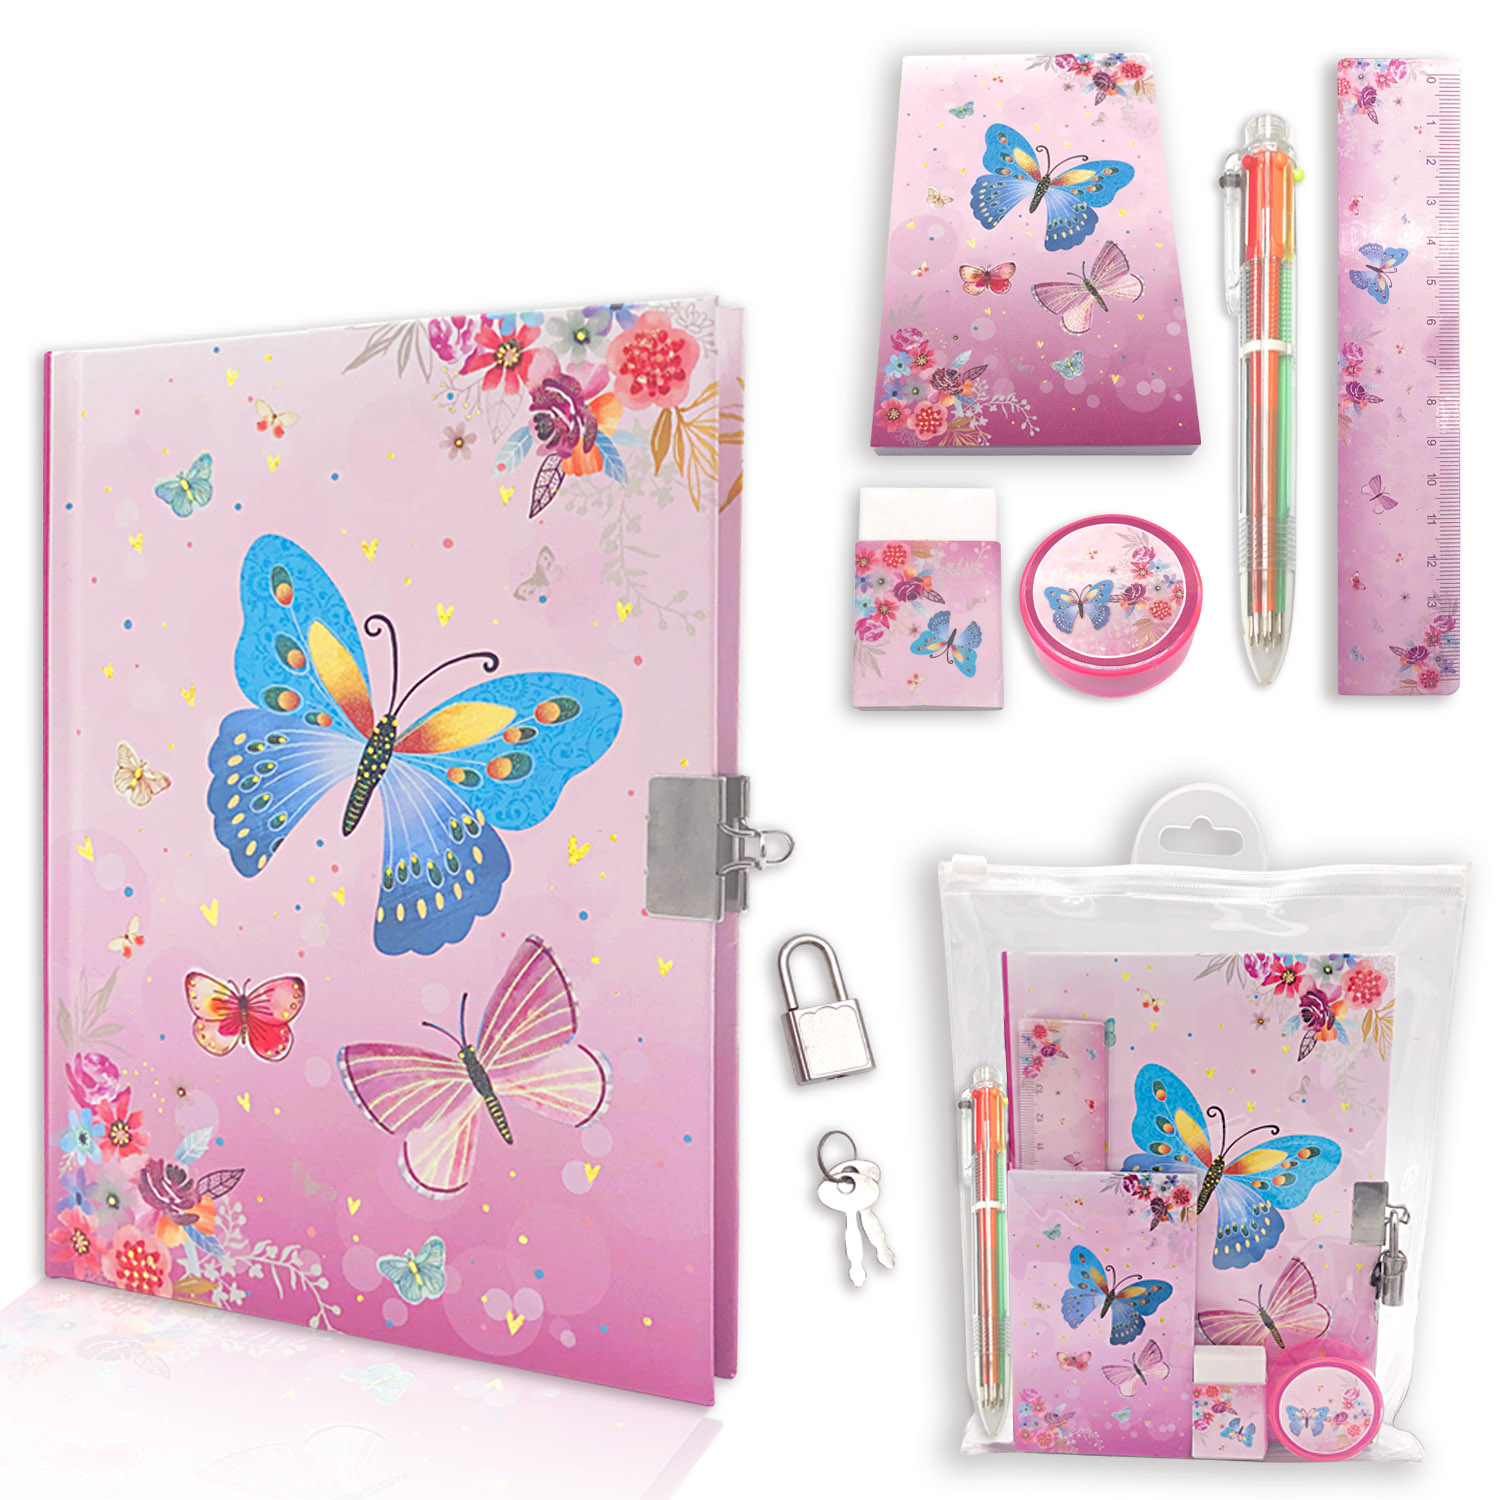 With Lock Journals Diary For Girls Kids Cartoon Diary for Decor Girls  Children